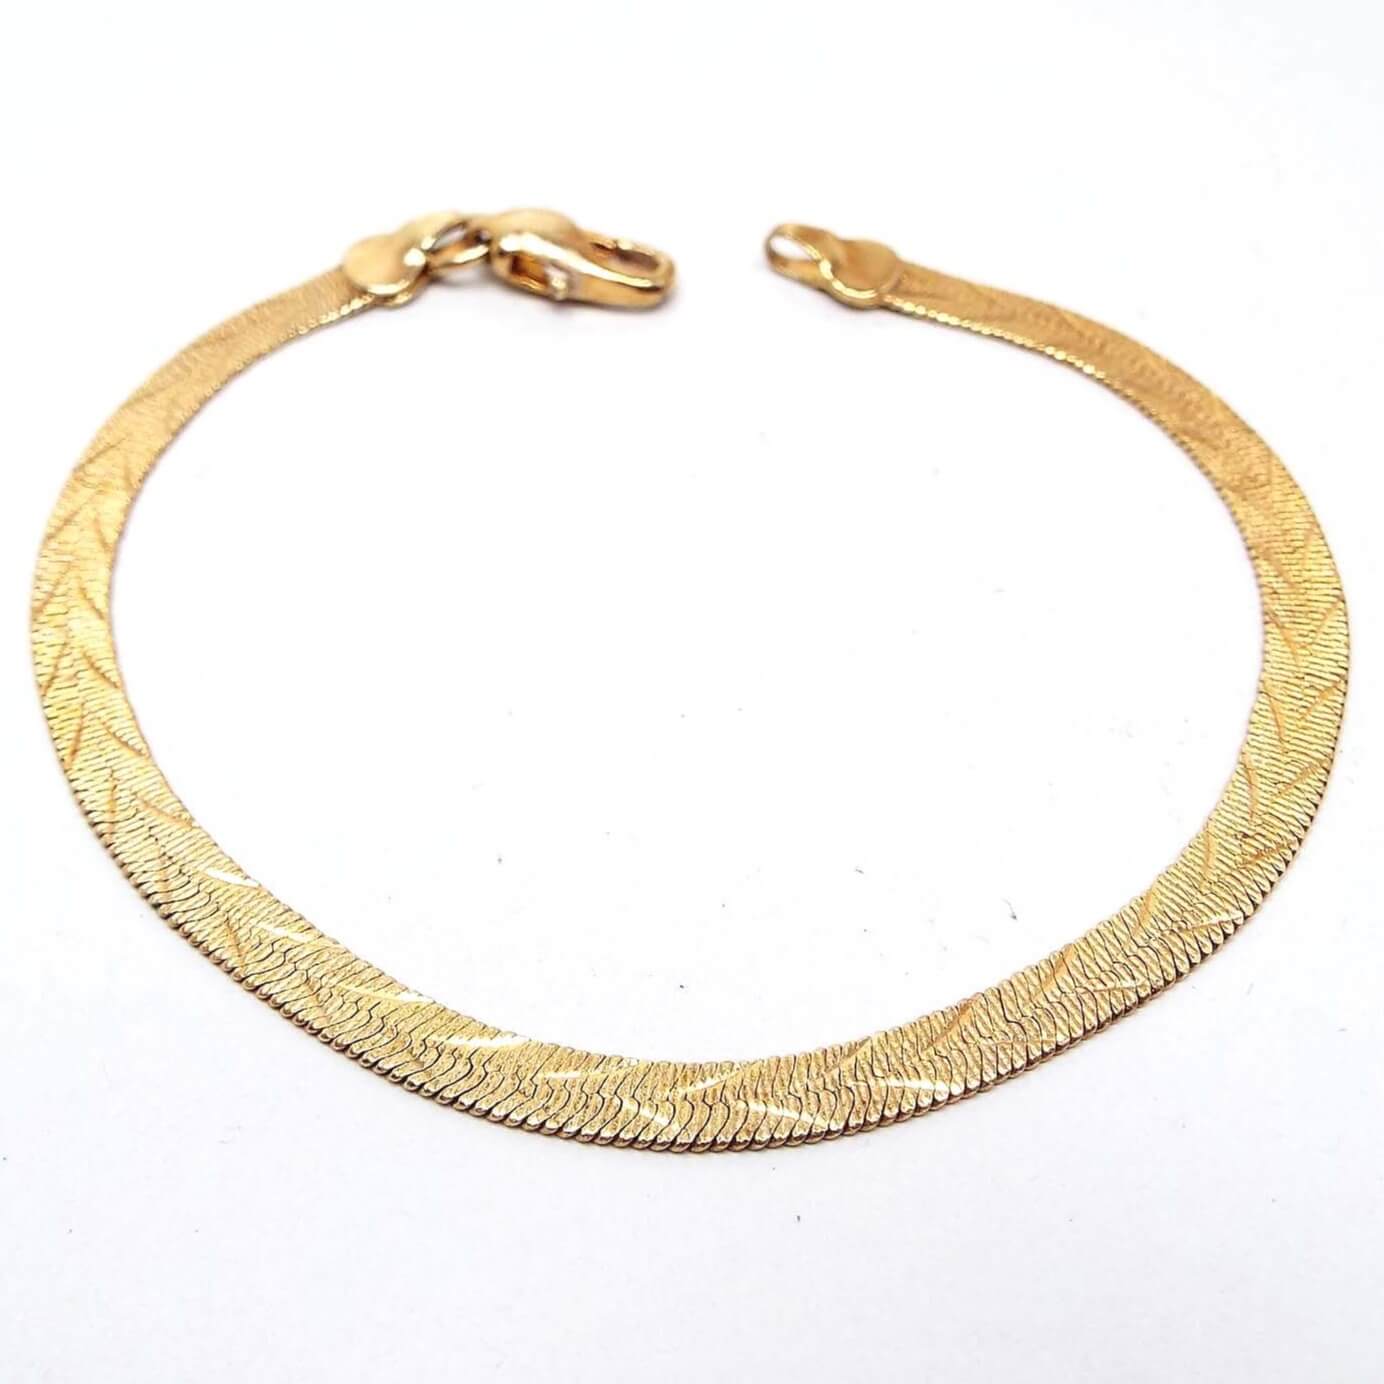 Top side view of the retro vintage reversible herringbone link chain bracelet. The metal is gold tone in color. This side has an etched V like pattern all the way down the bracelet. There is a lobster claw clasp on the end.